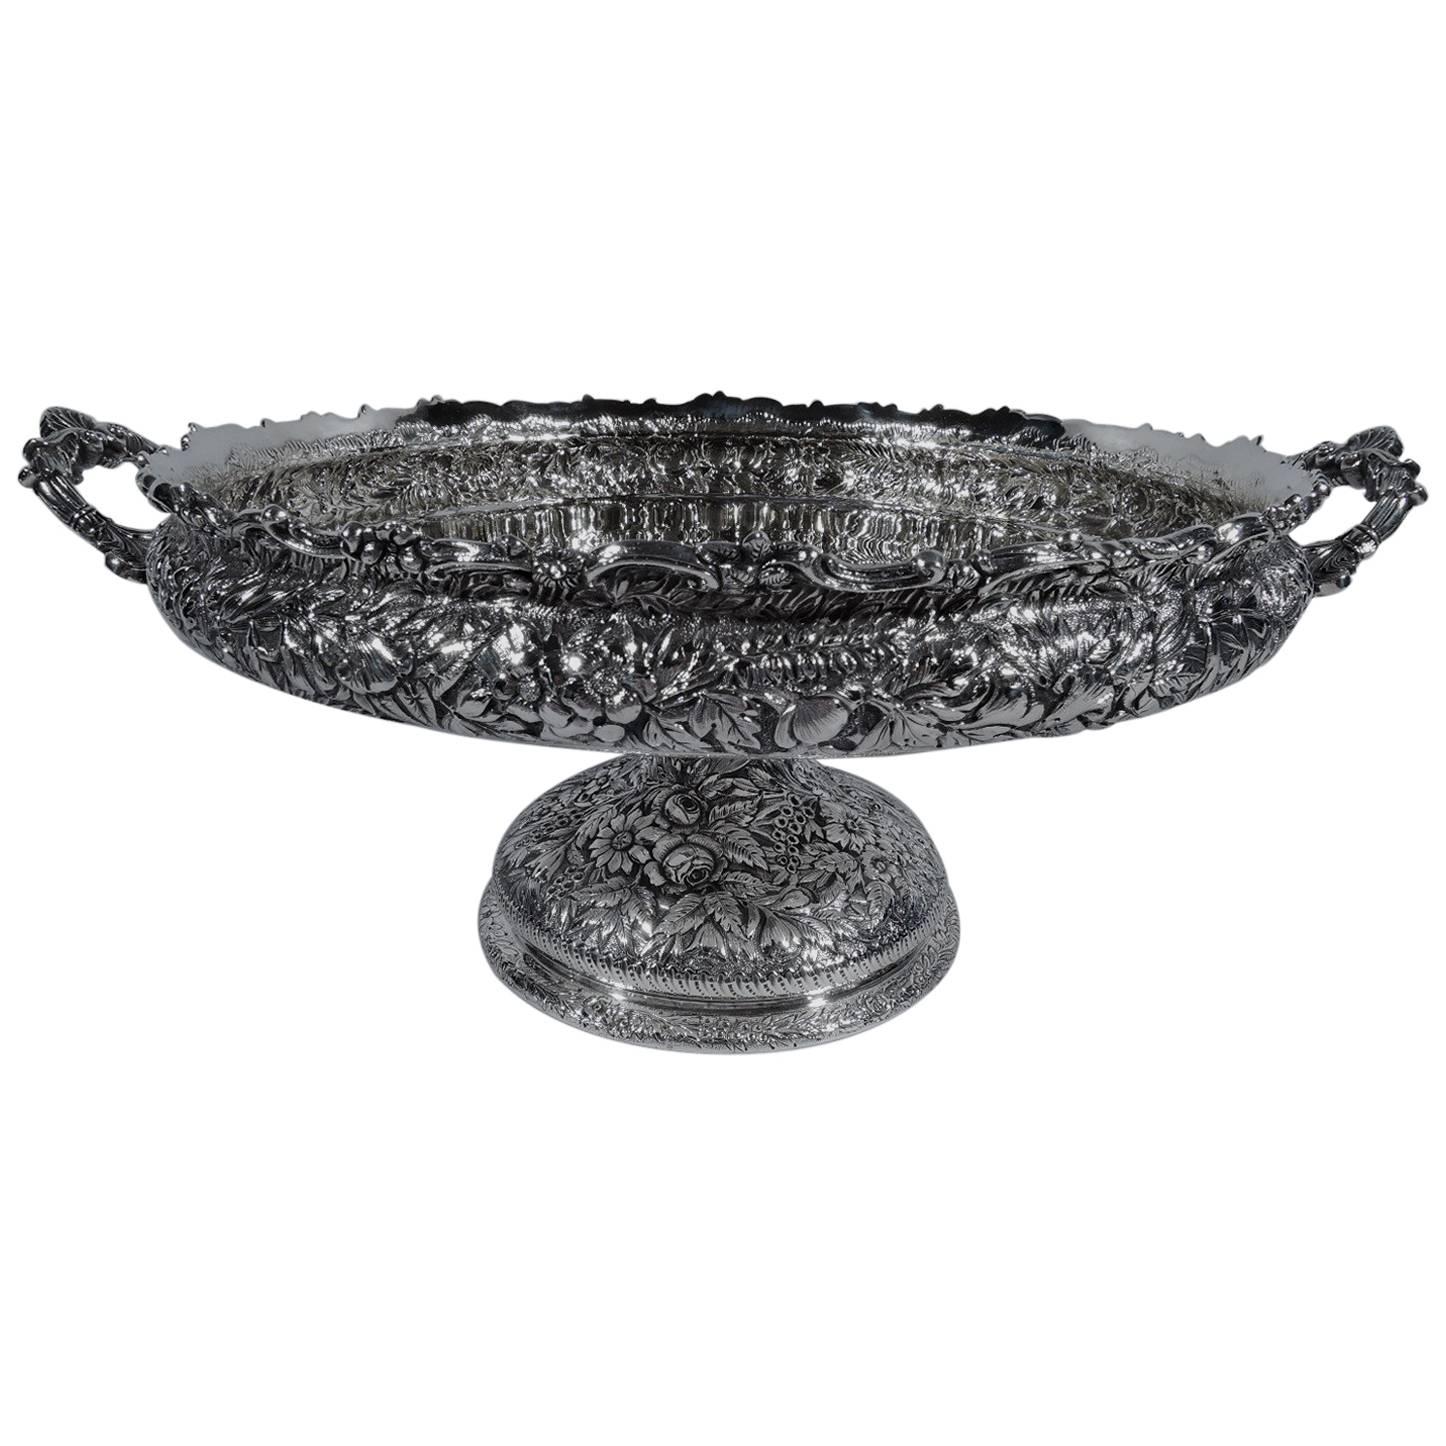 Antique Tiffany Sterling Silver Footed Centrepiece Bowl